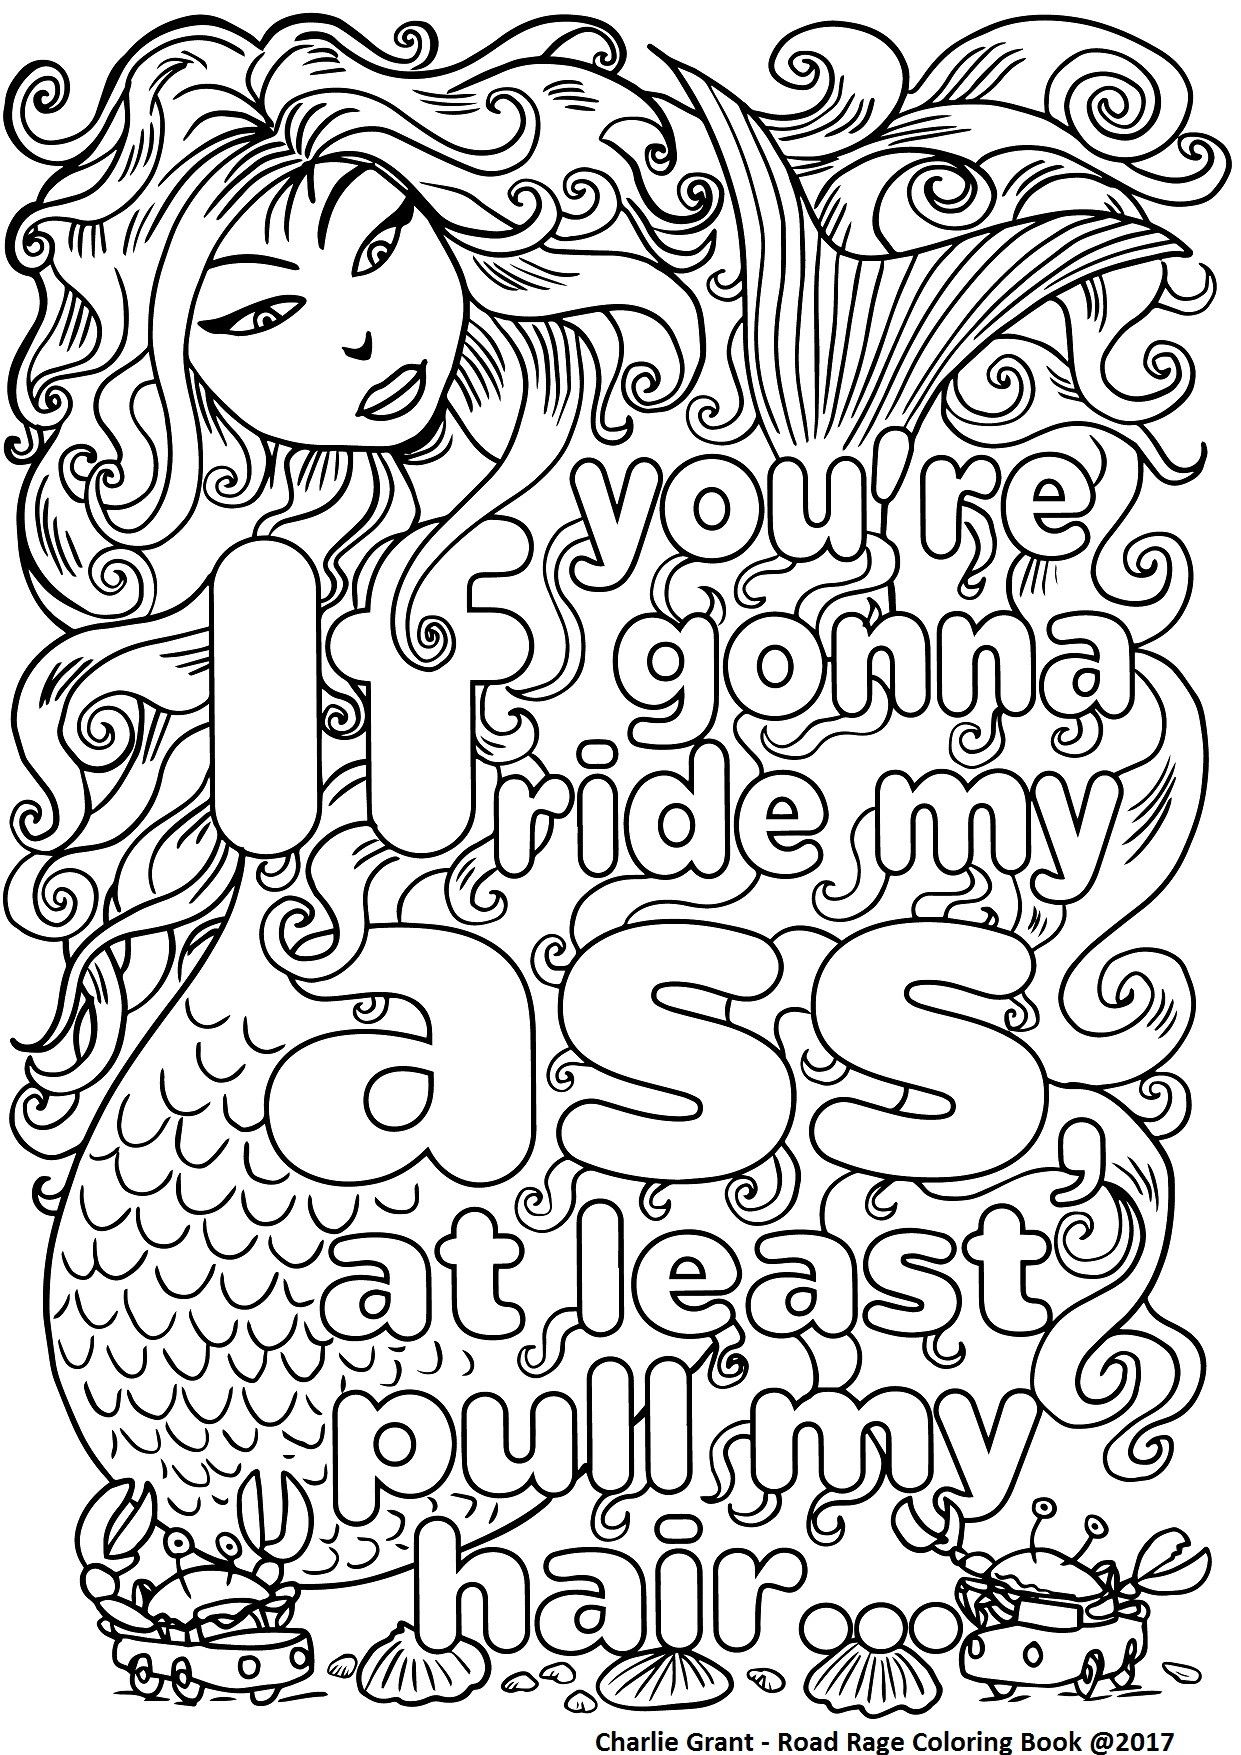 Swear Words Coloring Pages - Coloring Home